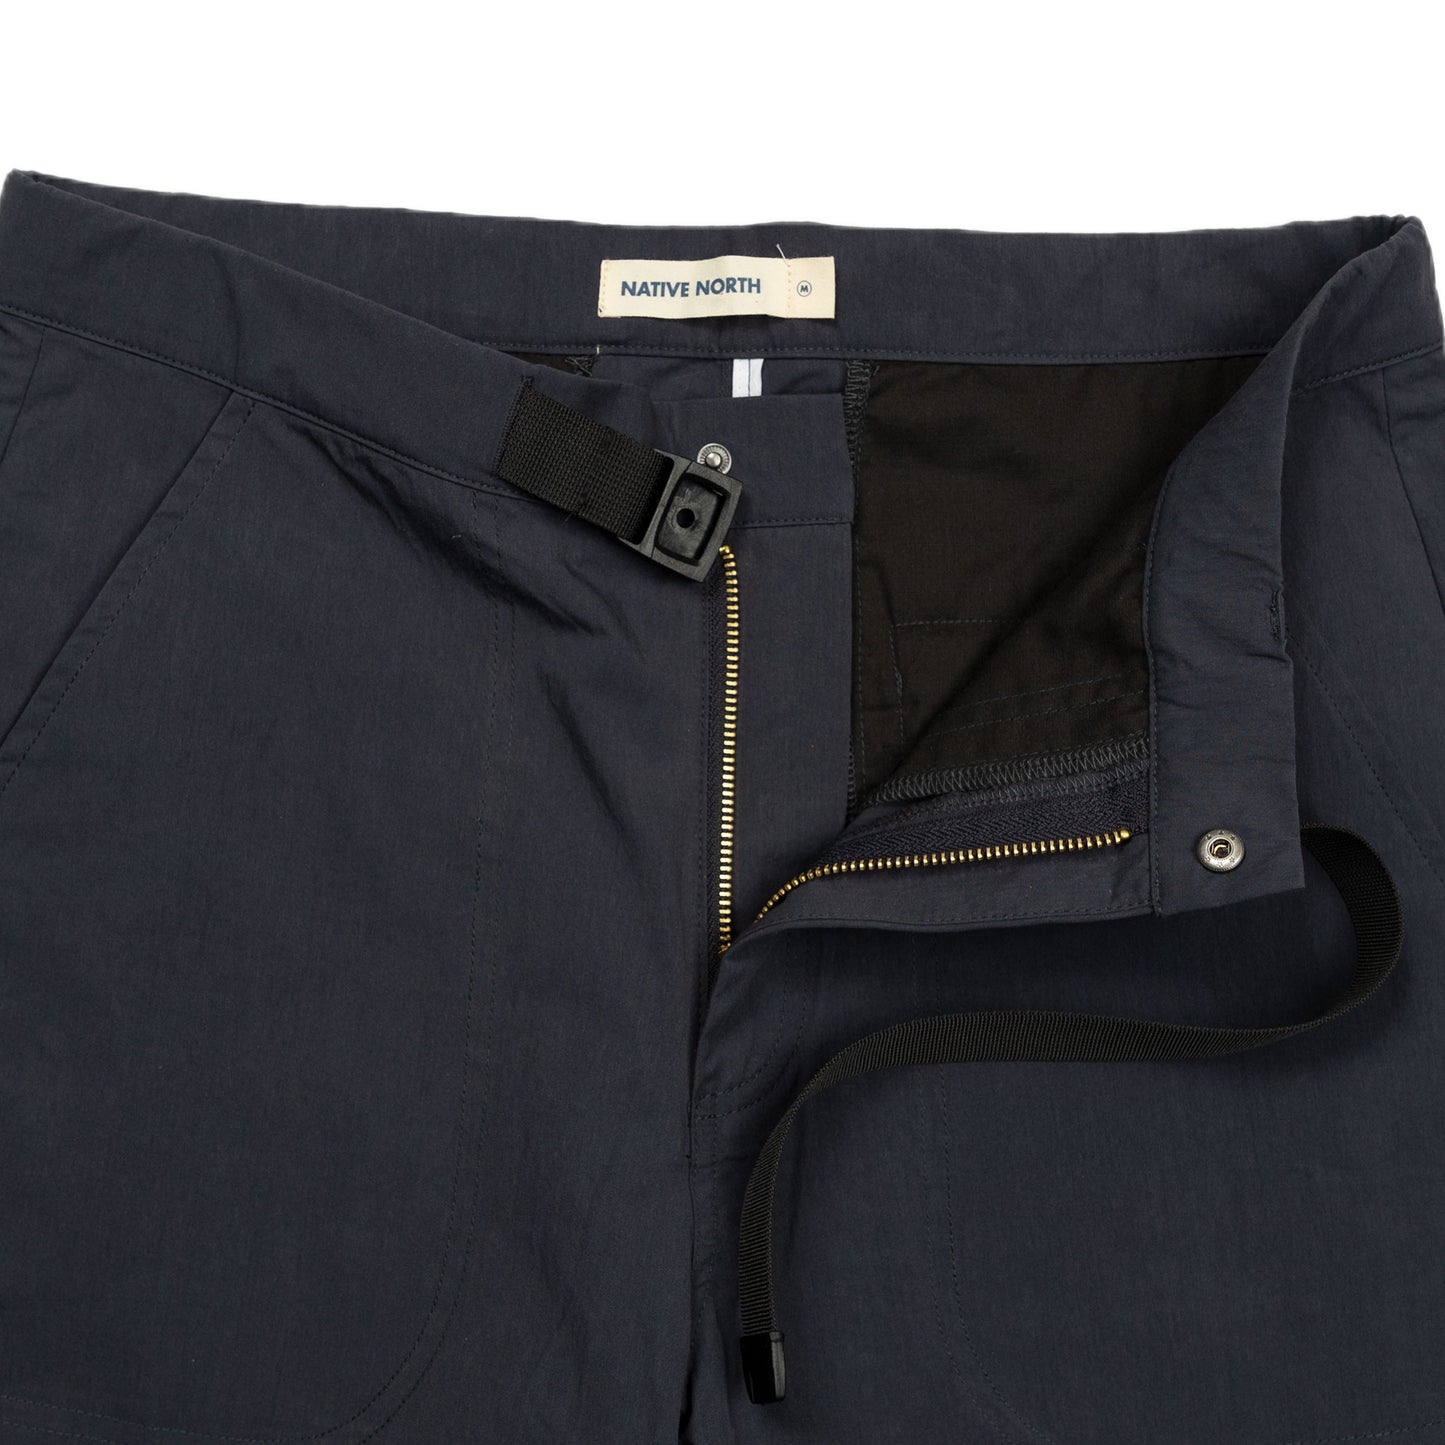 Native North Toro Paper Pant in Navy detail